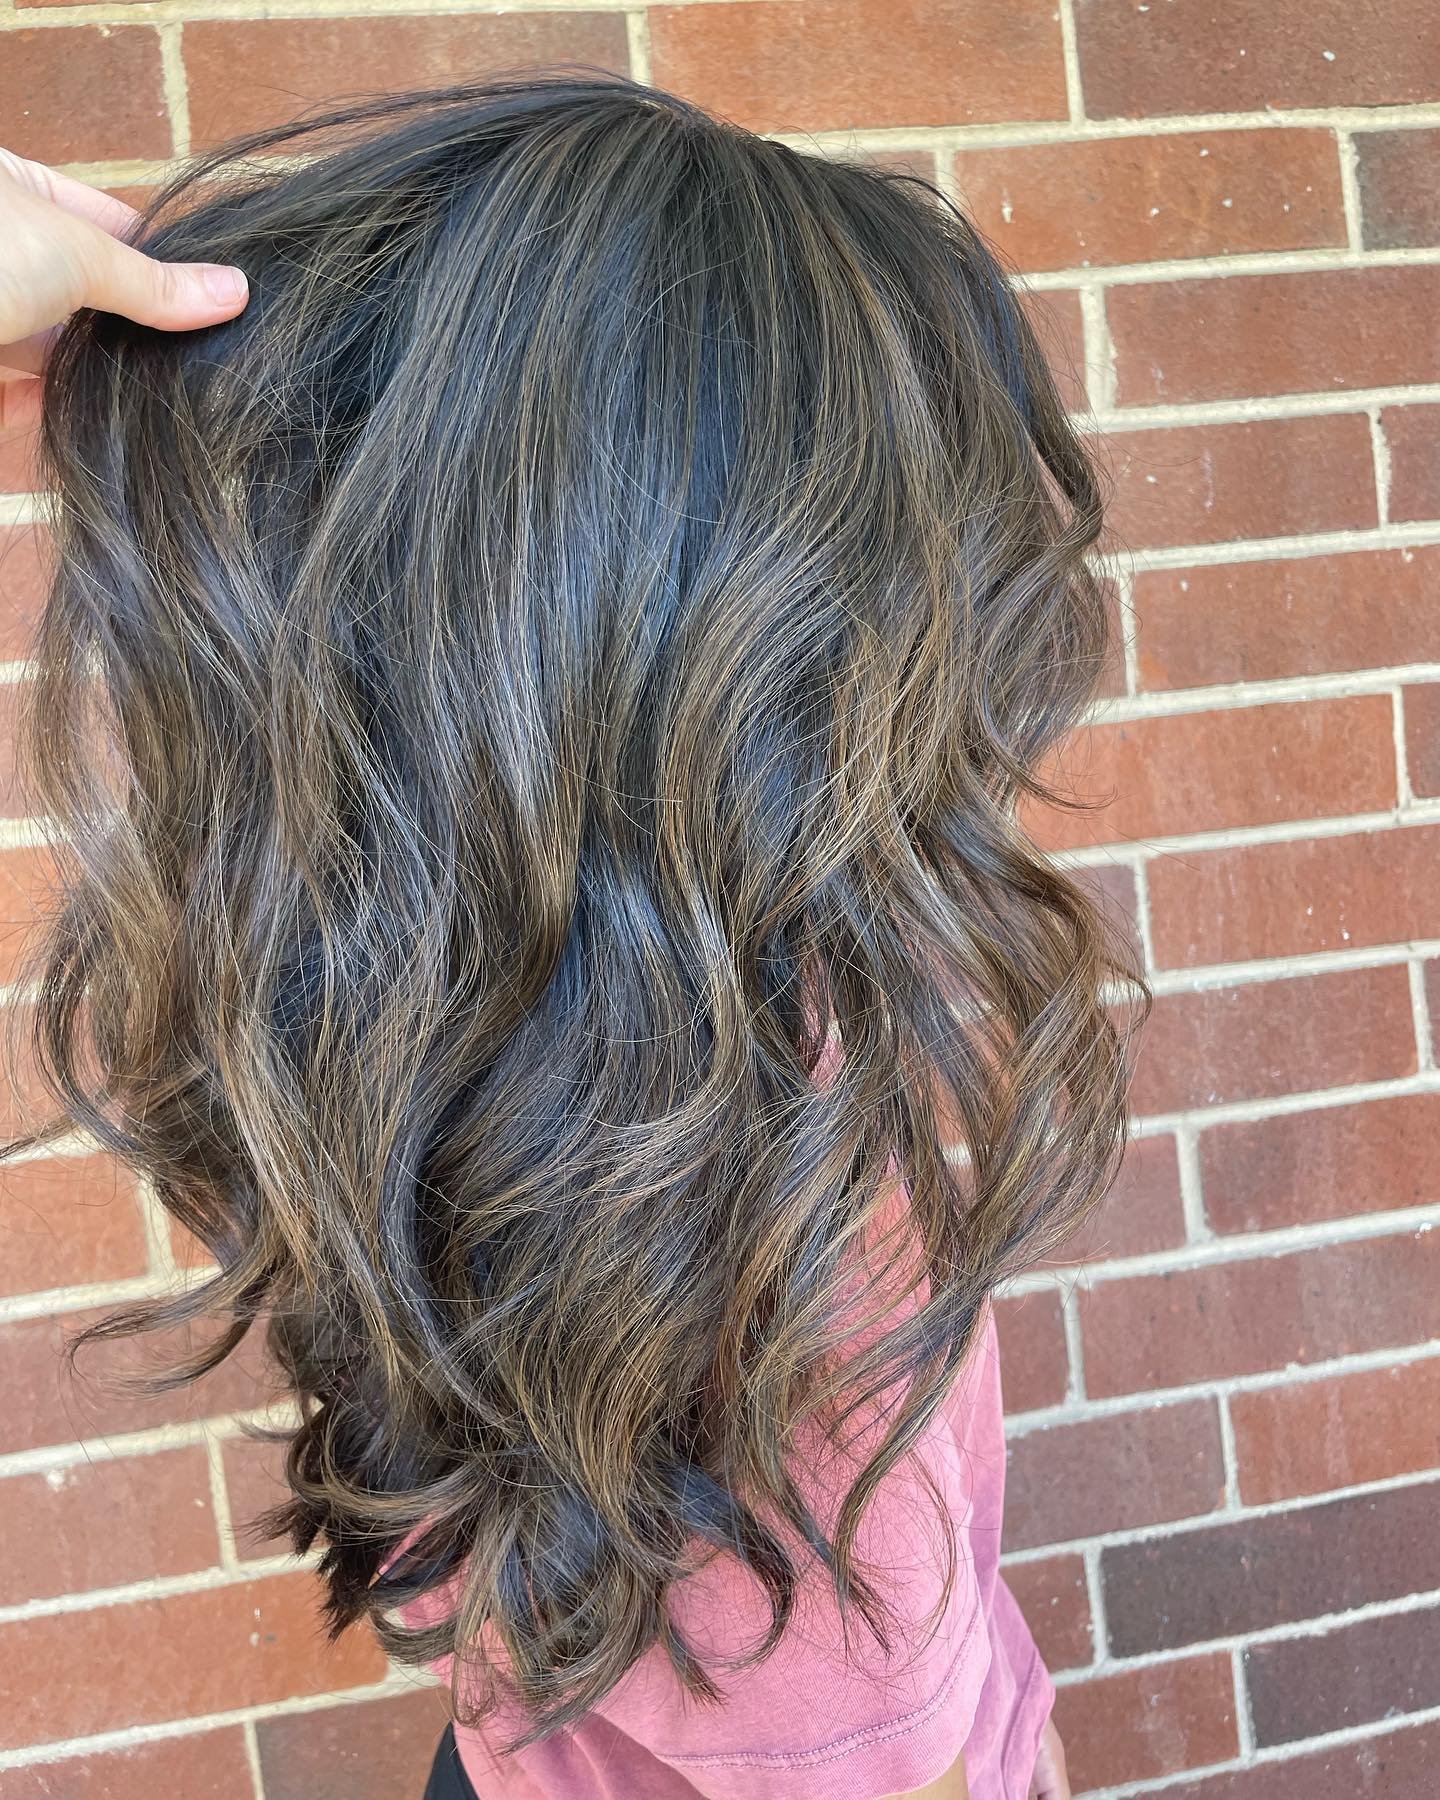 I forgot to post this gorgeous brunette color I did last week 😍
#HBK #HairByKimberlyKoster #BrunetteHair